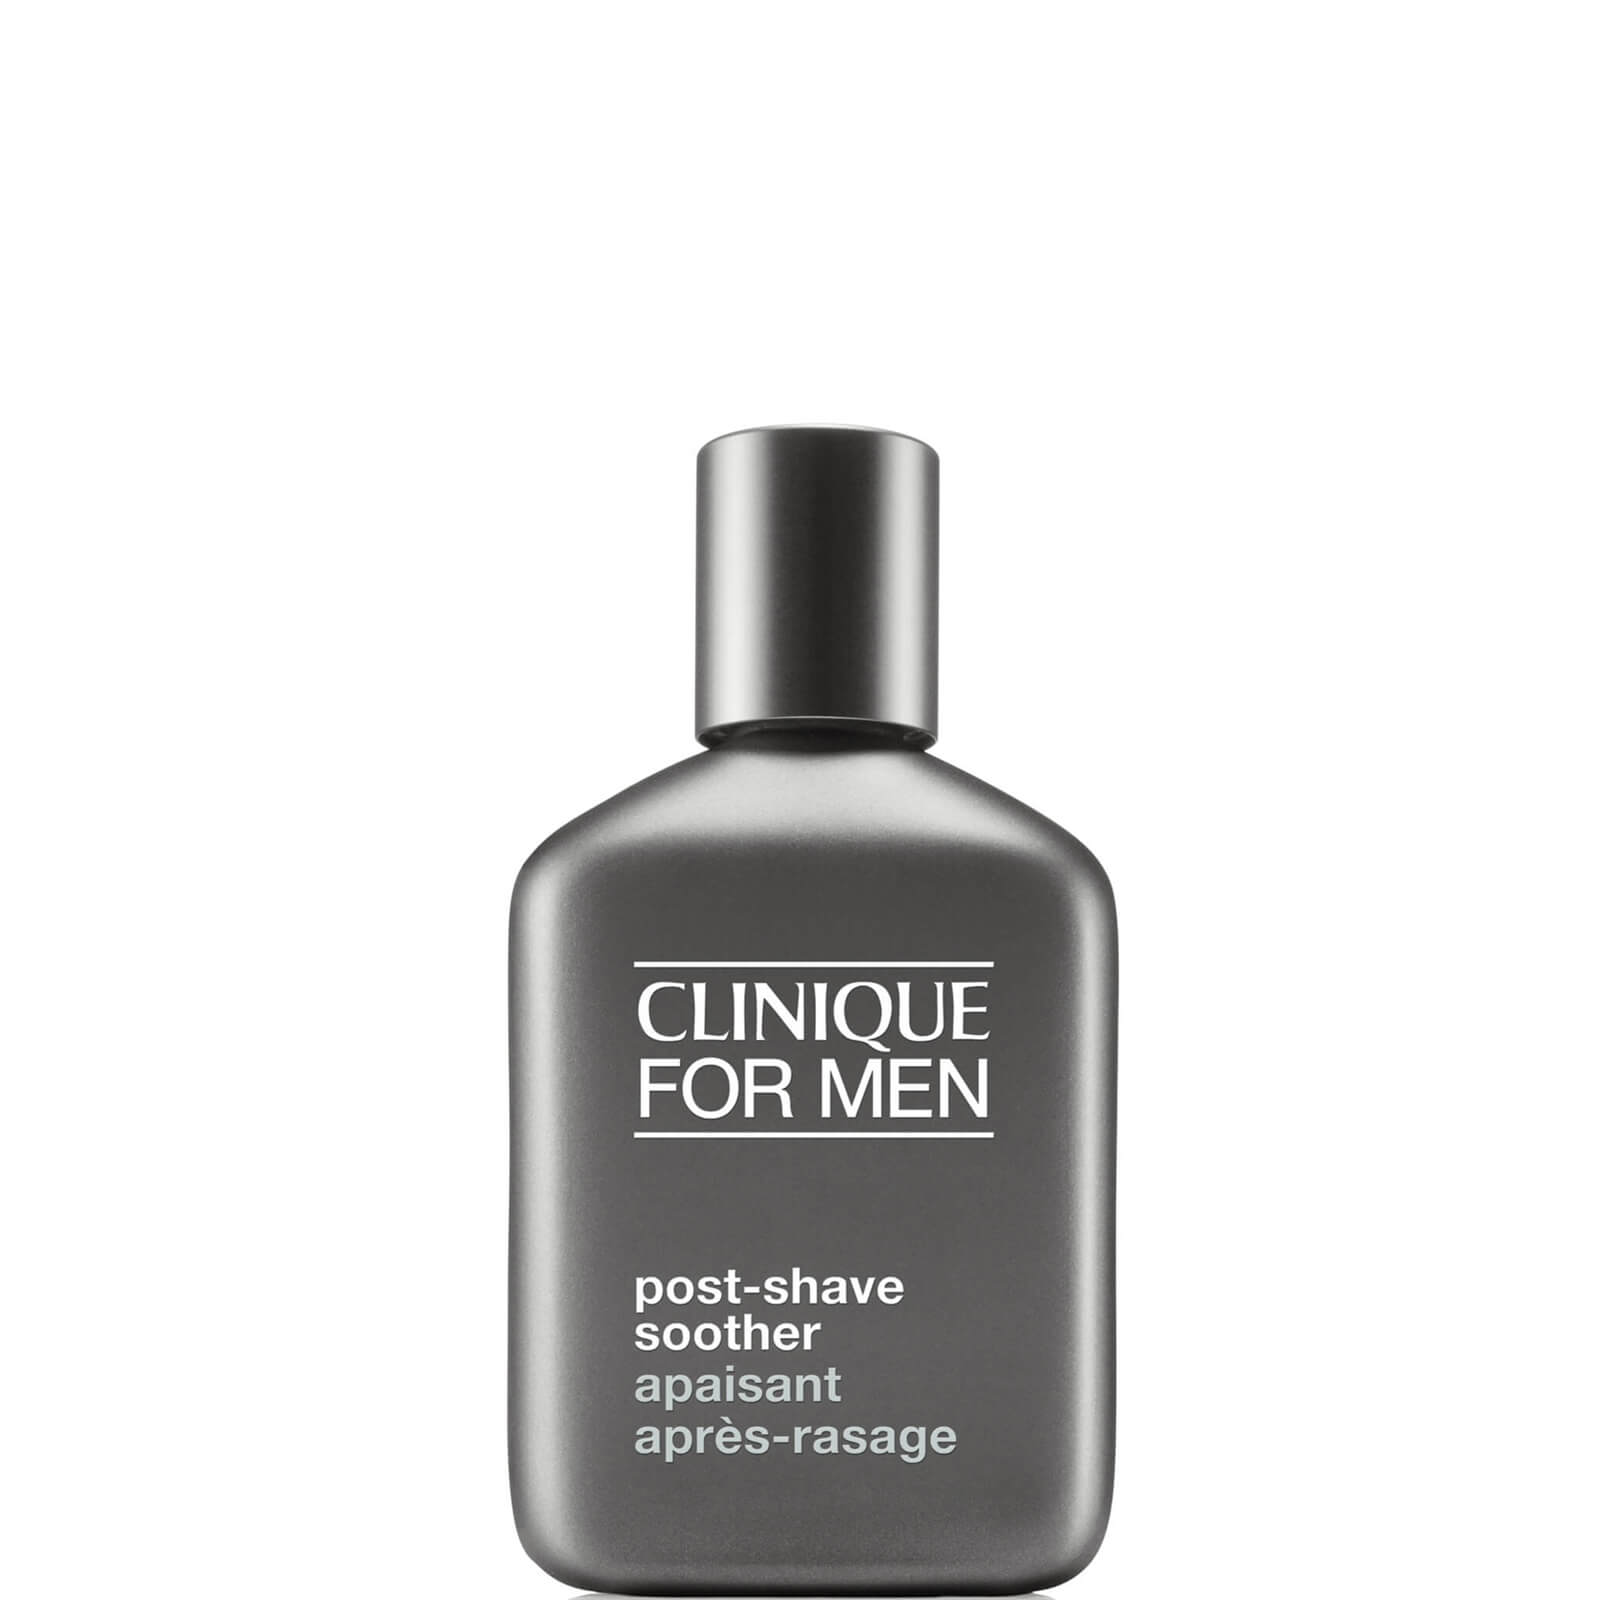 Image of Clinique for Men Post-Shave Soother 75ml